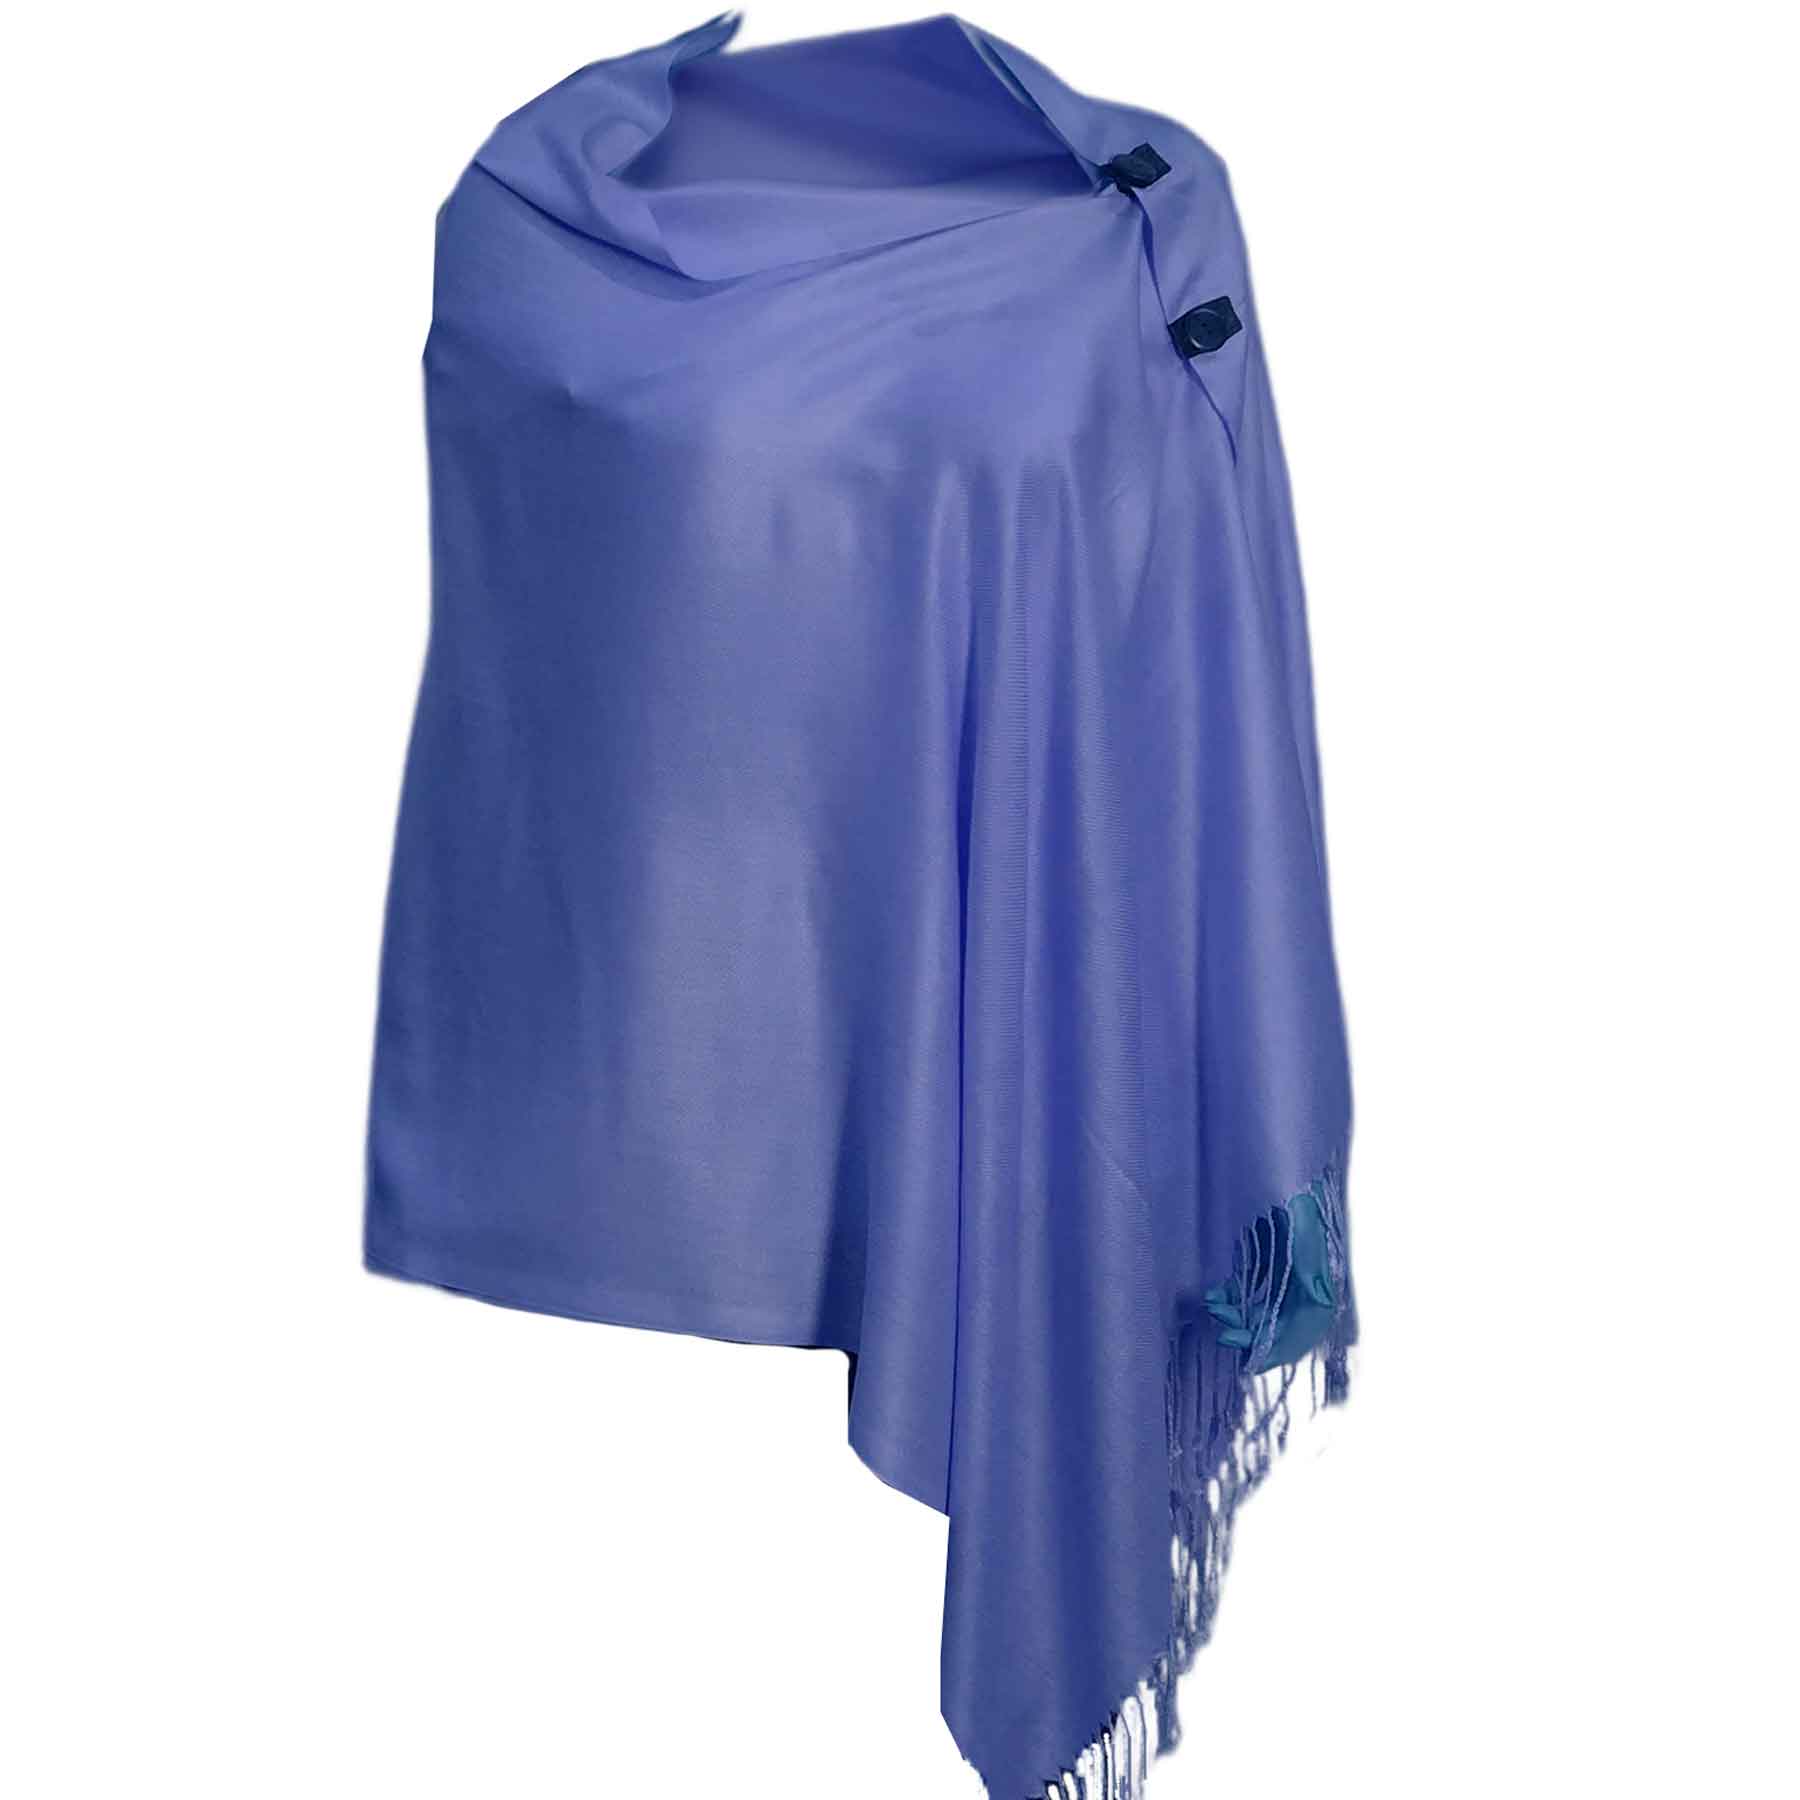 Solid Royal Blue<br>
Pashmina Style Button Shawl